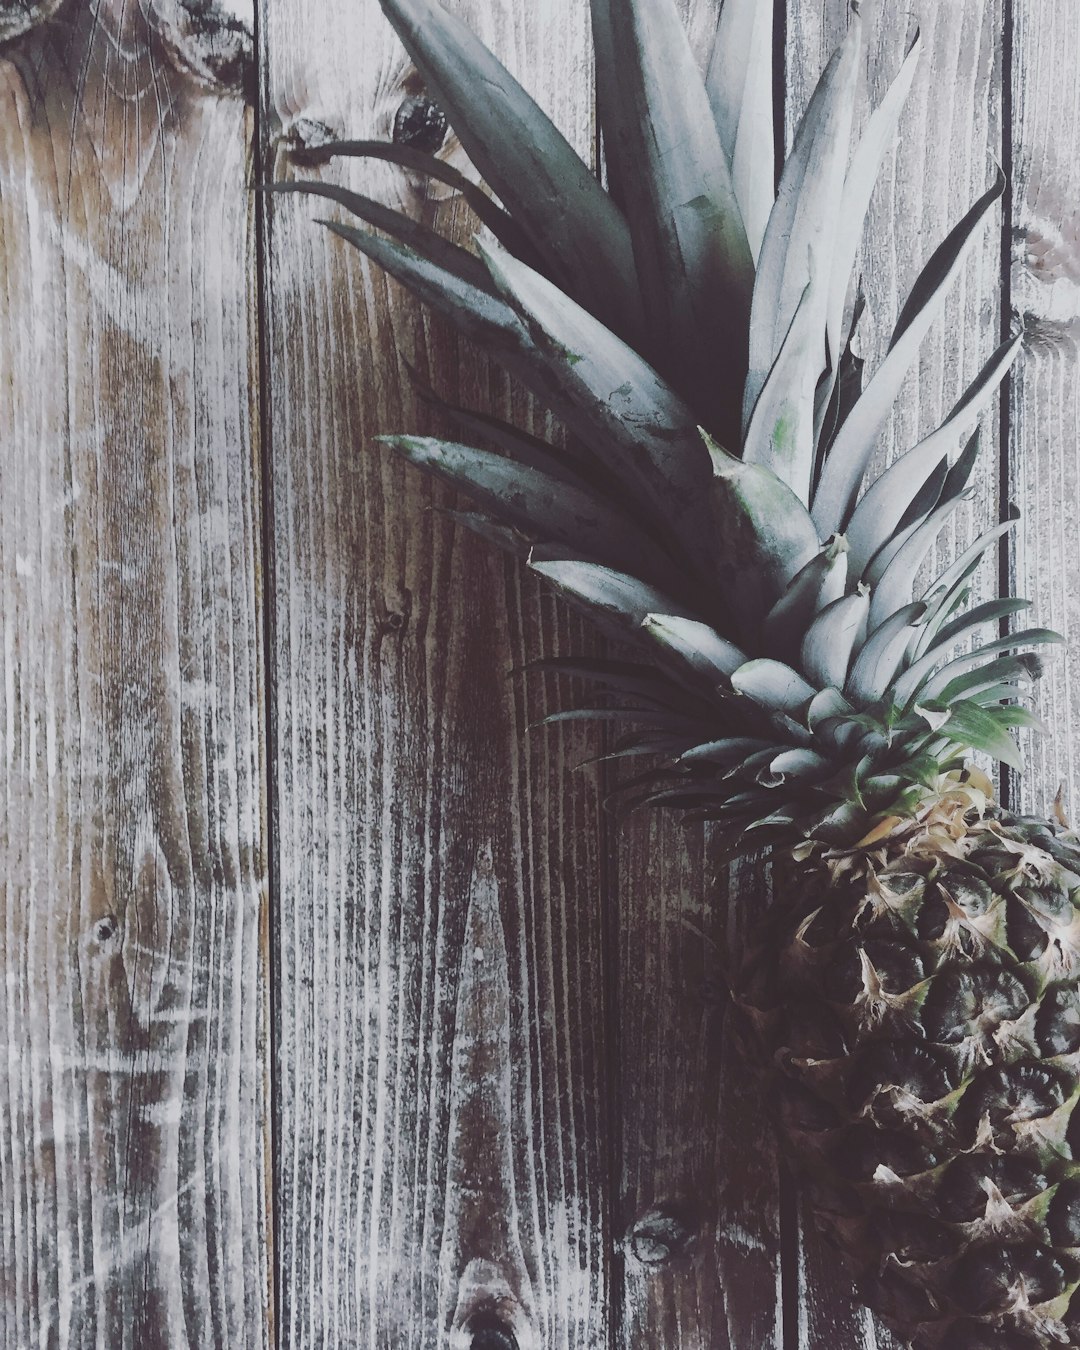 High Resolution stock photo of pineapple for download